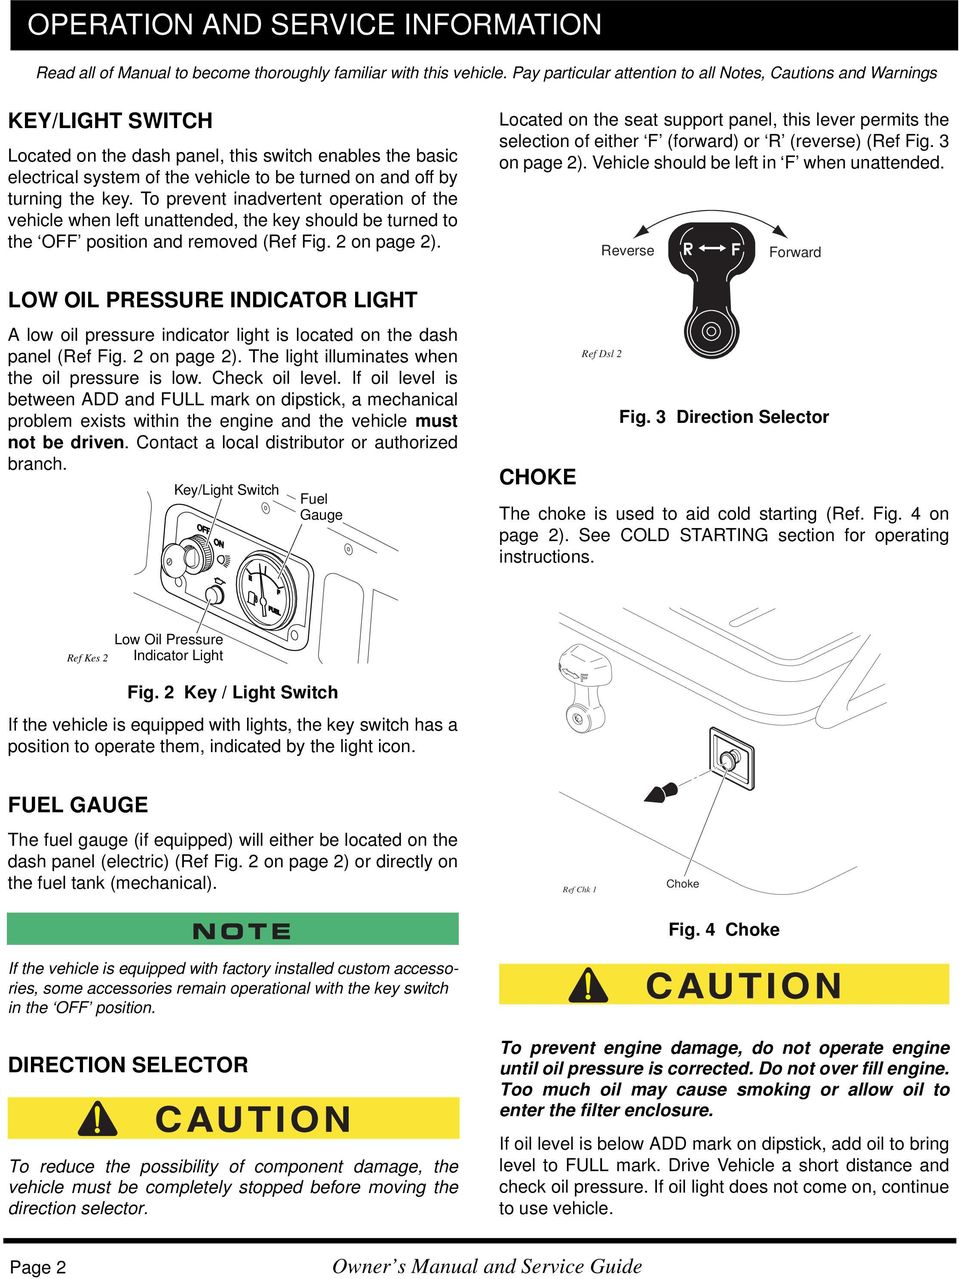 turning the key. To prevent inadvertent operation of the vehicle when left unattended, the key should be turned to the OFF position and removed (Ref Fig. 2 on page 2).